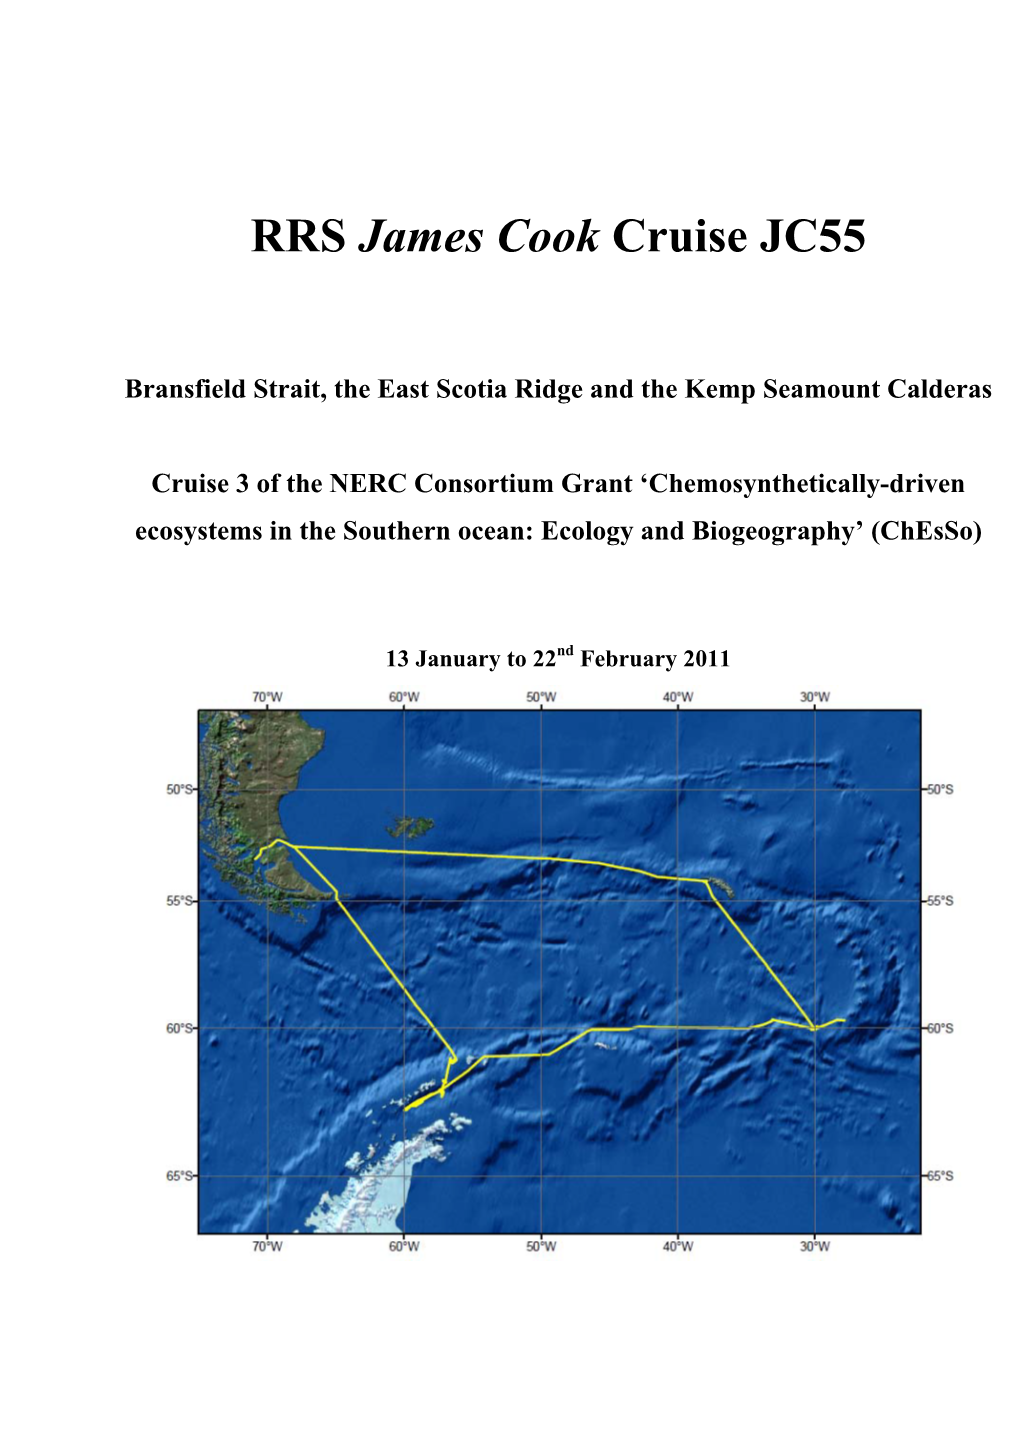 RRS James Cook Cruise JC55